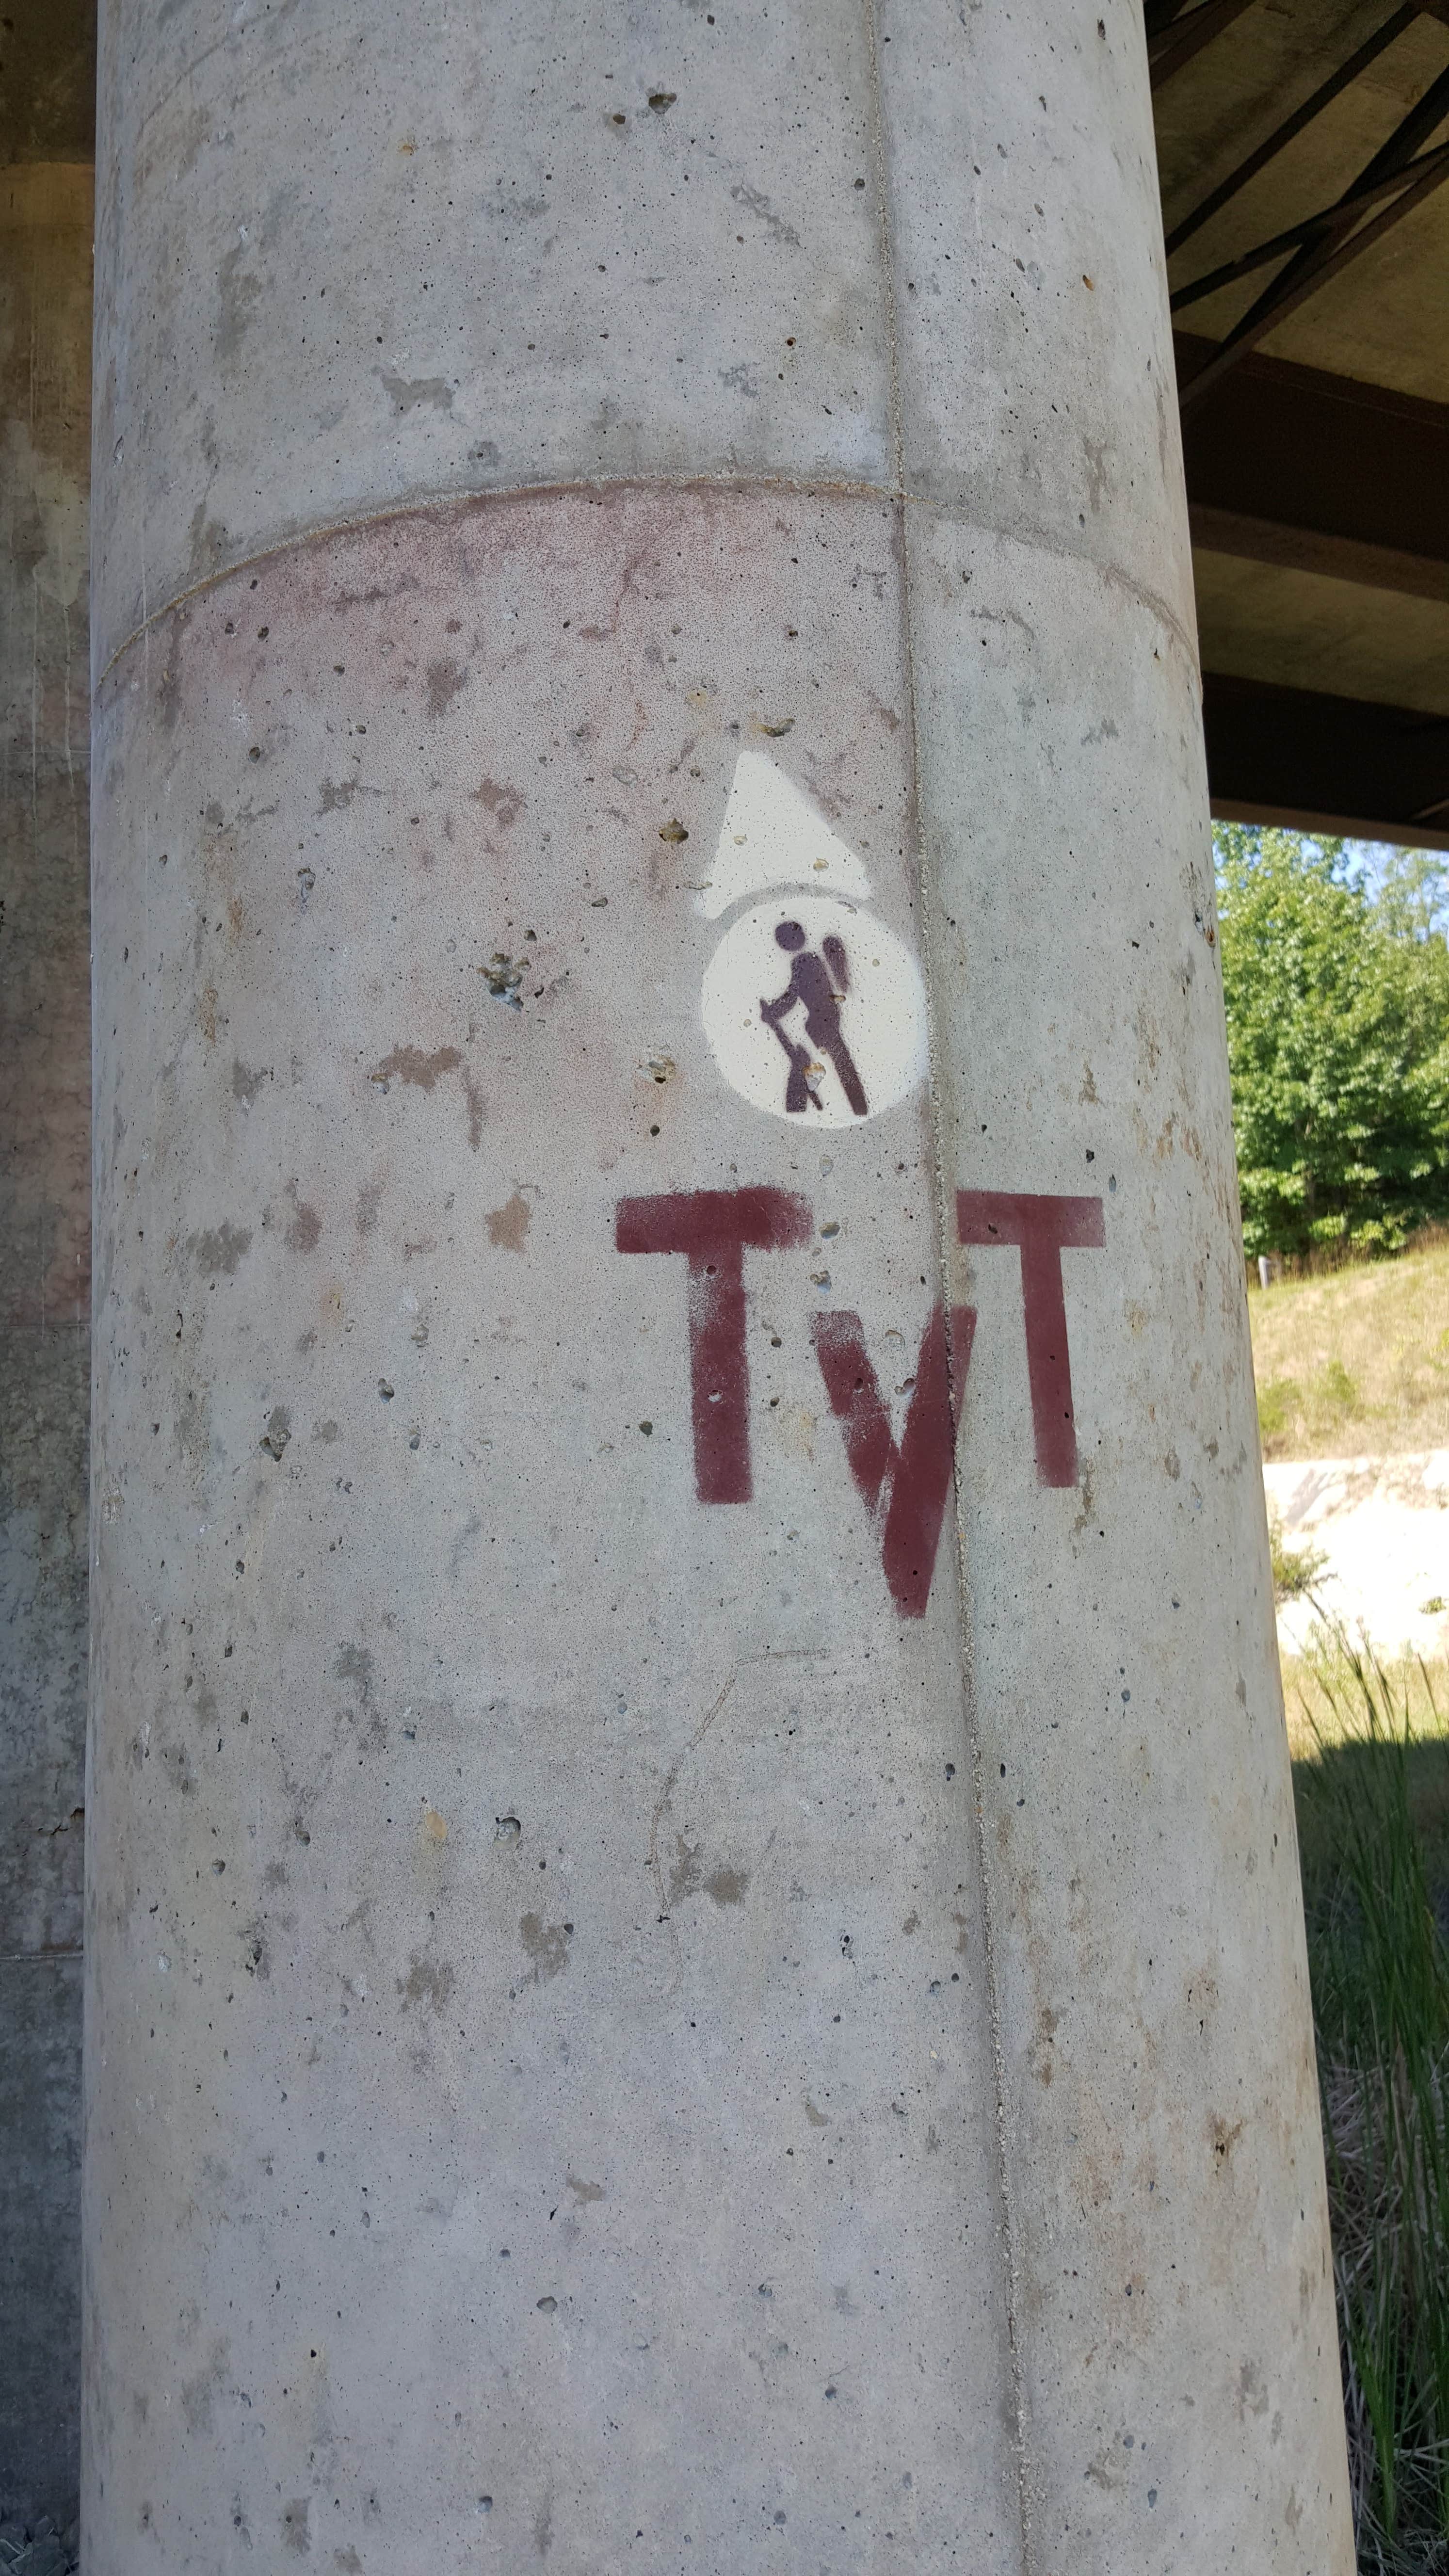 One of the trail markings for Twin Valley Trail